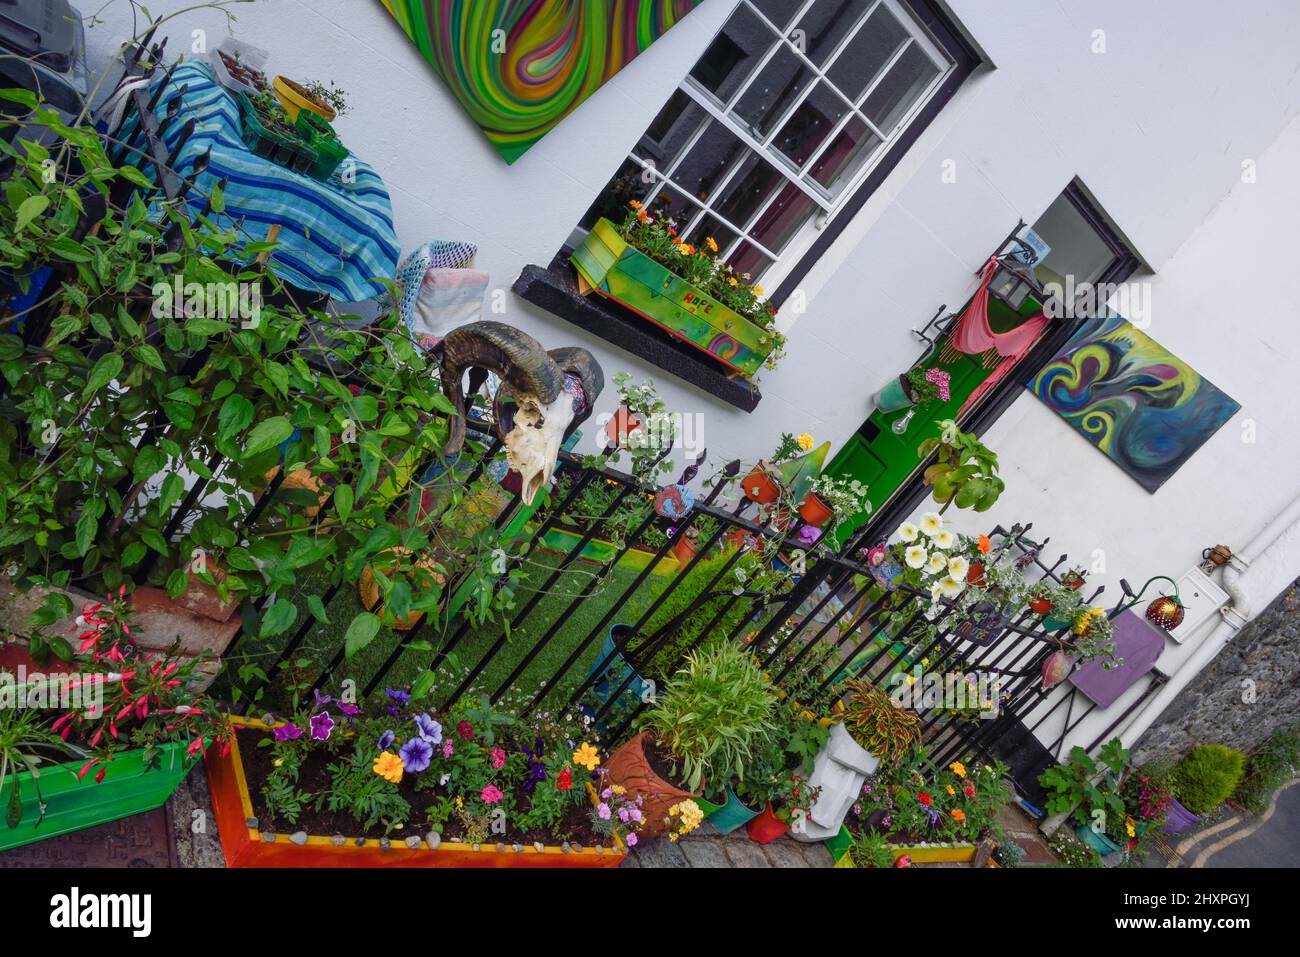 Compact garden in front of a cottage, with railings, astroturf and painting hanging on the walls. Stock Photo